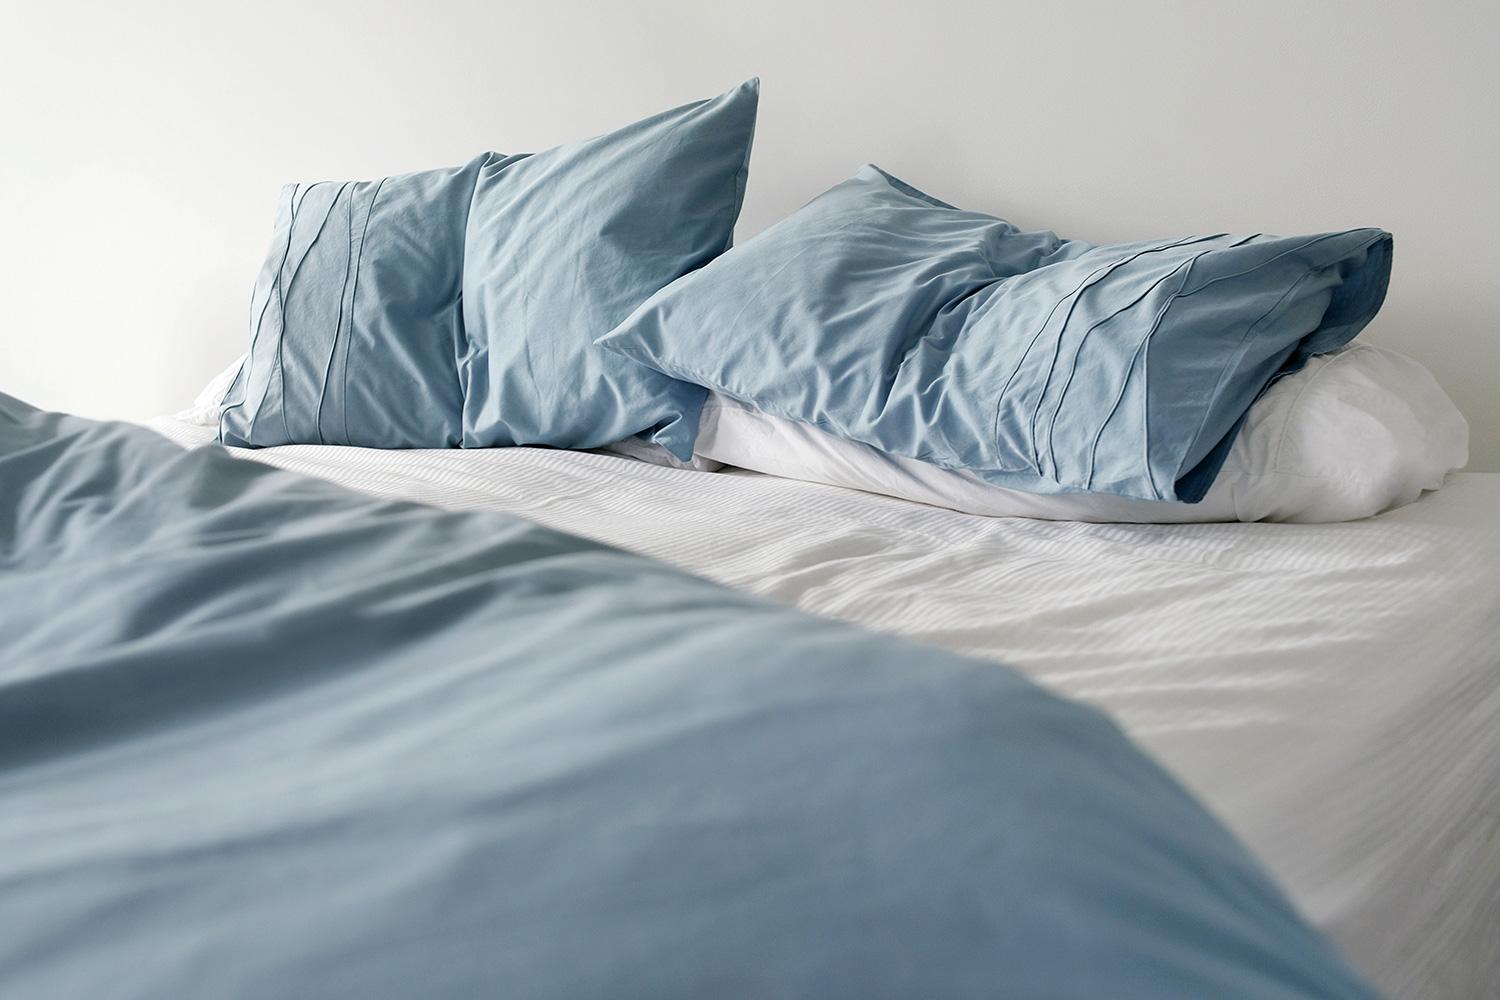 https://www.digitaltrends.com/wp-content/uploads/2015/04/Dirty-Sheets-Cleaning.jpg?fit=1500%2C1000&p=1